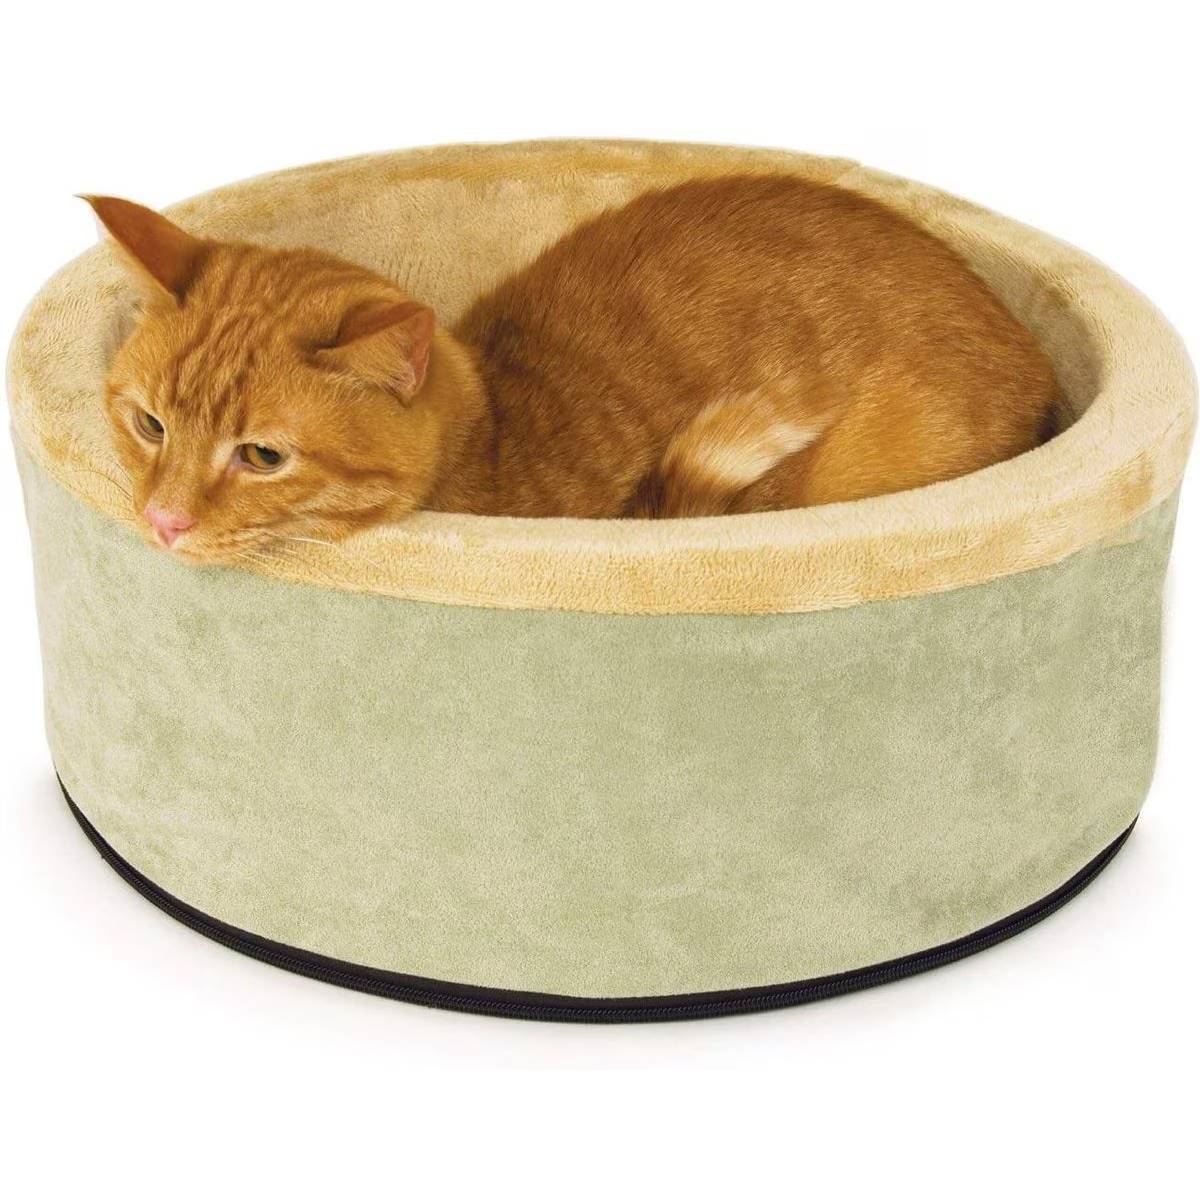 K&H Pet Products Thermo-Kitty Bed Indoor Heated Cat Bed